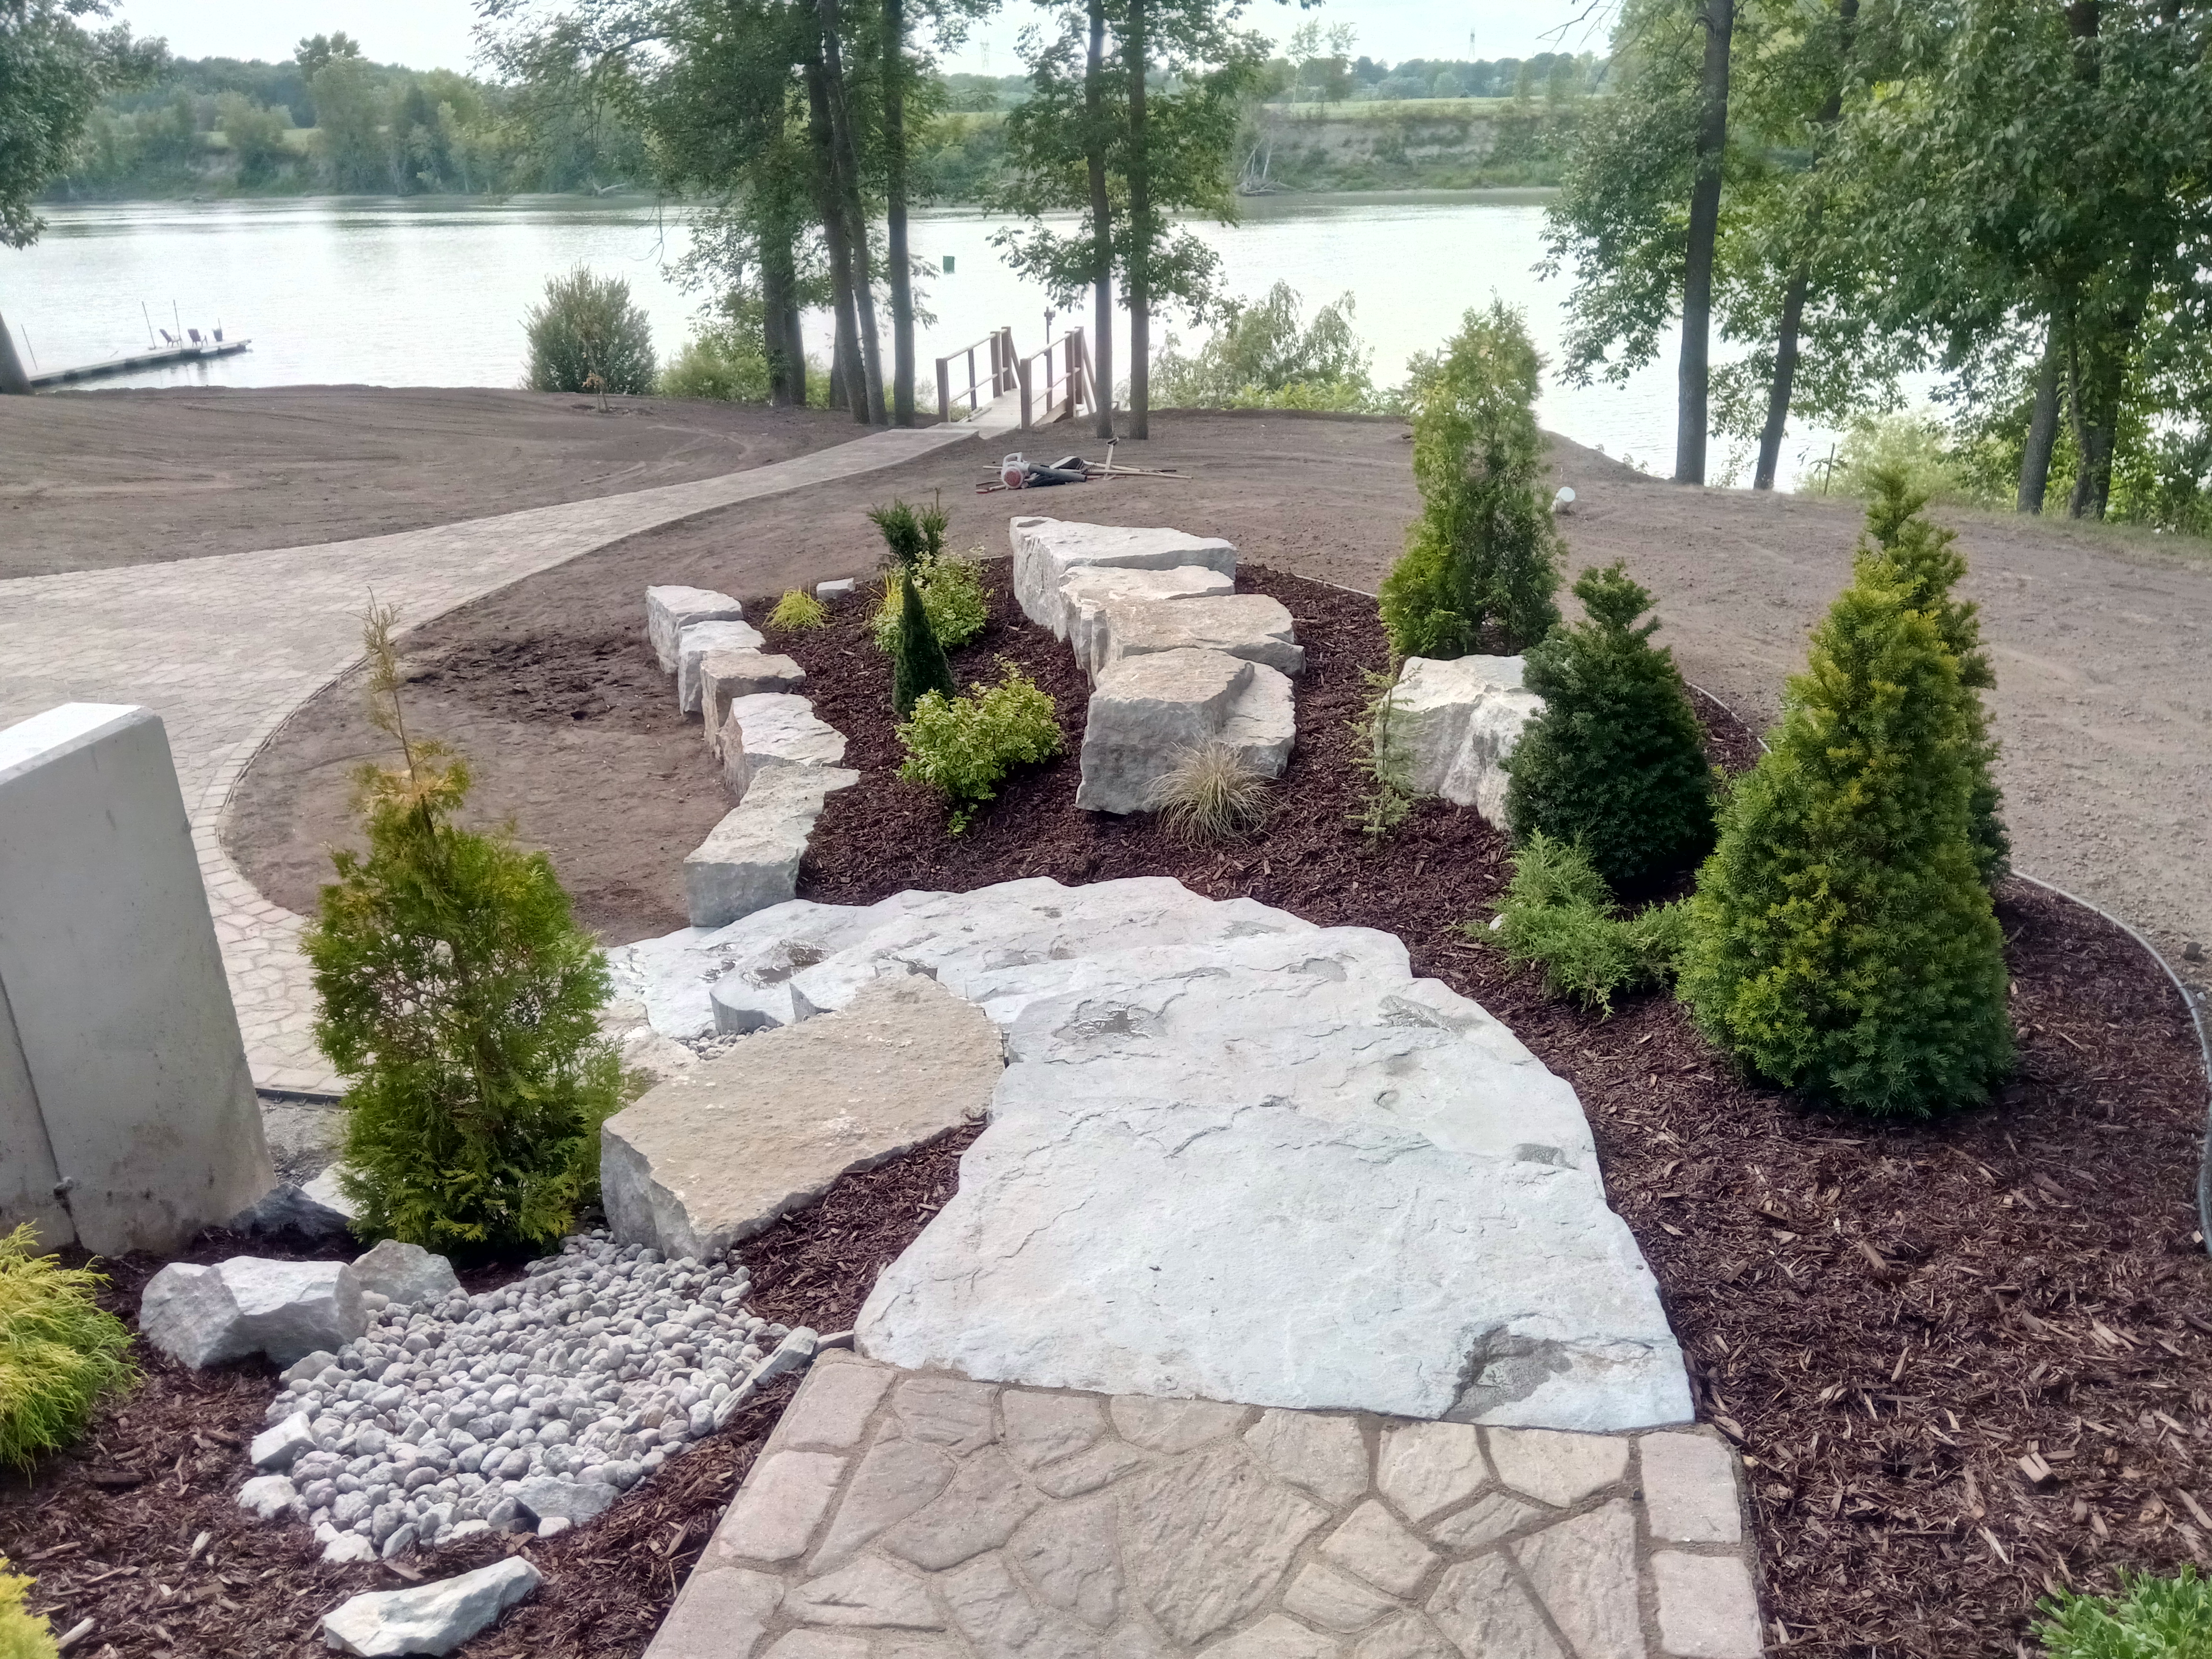 plantation, shrubs and landscaping designs, DESIGN AND PROFESSIONNAL PLANIFICATION